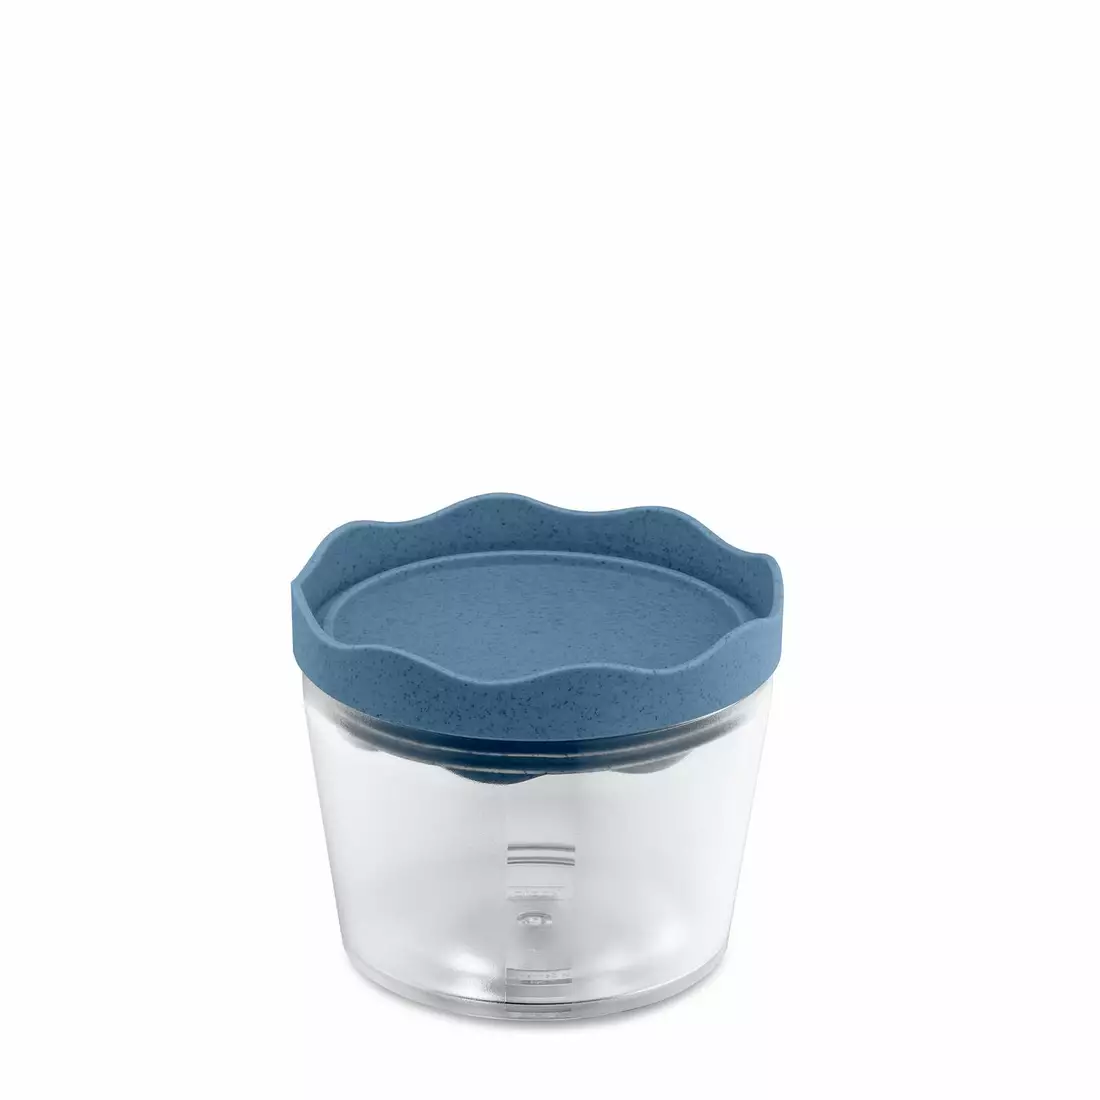 Koziol Prince S food container 0,3L, organic deep blue